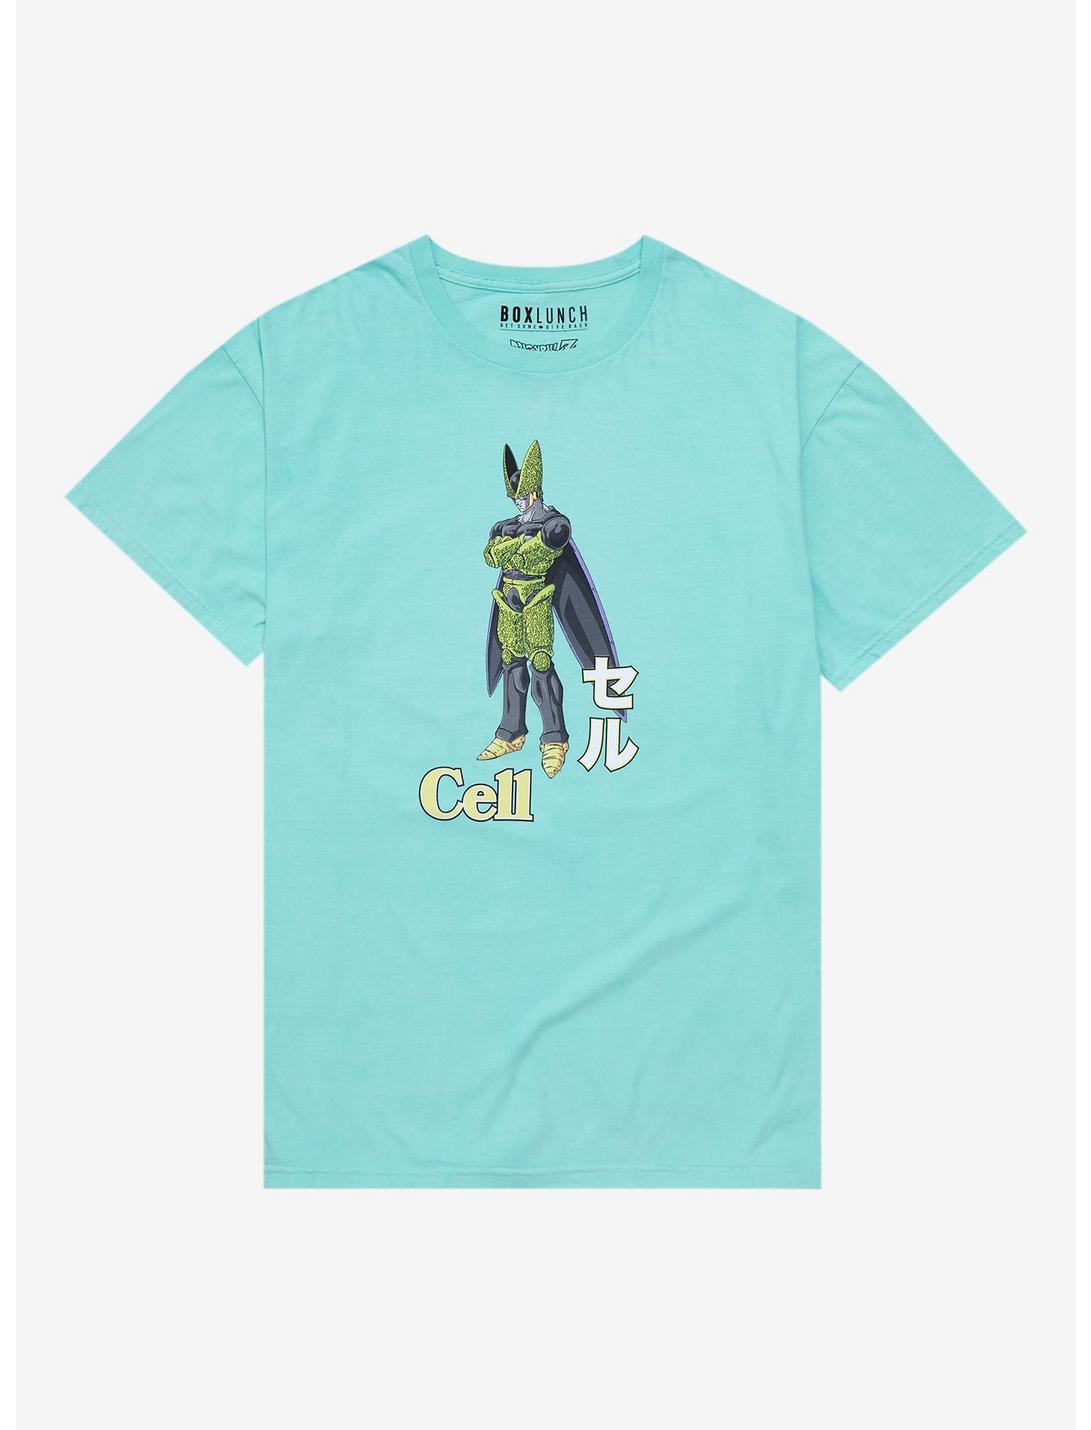 Dragon Ball Z Cell Portrait T-Shirt - BoxLunch Exclusive, MINT, hi-res